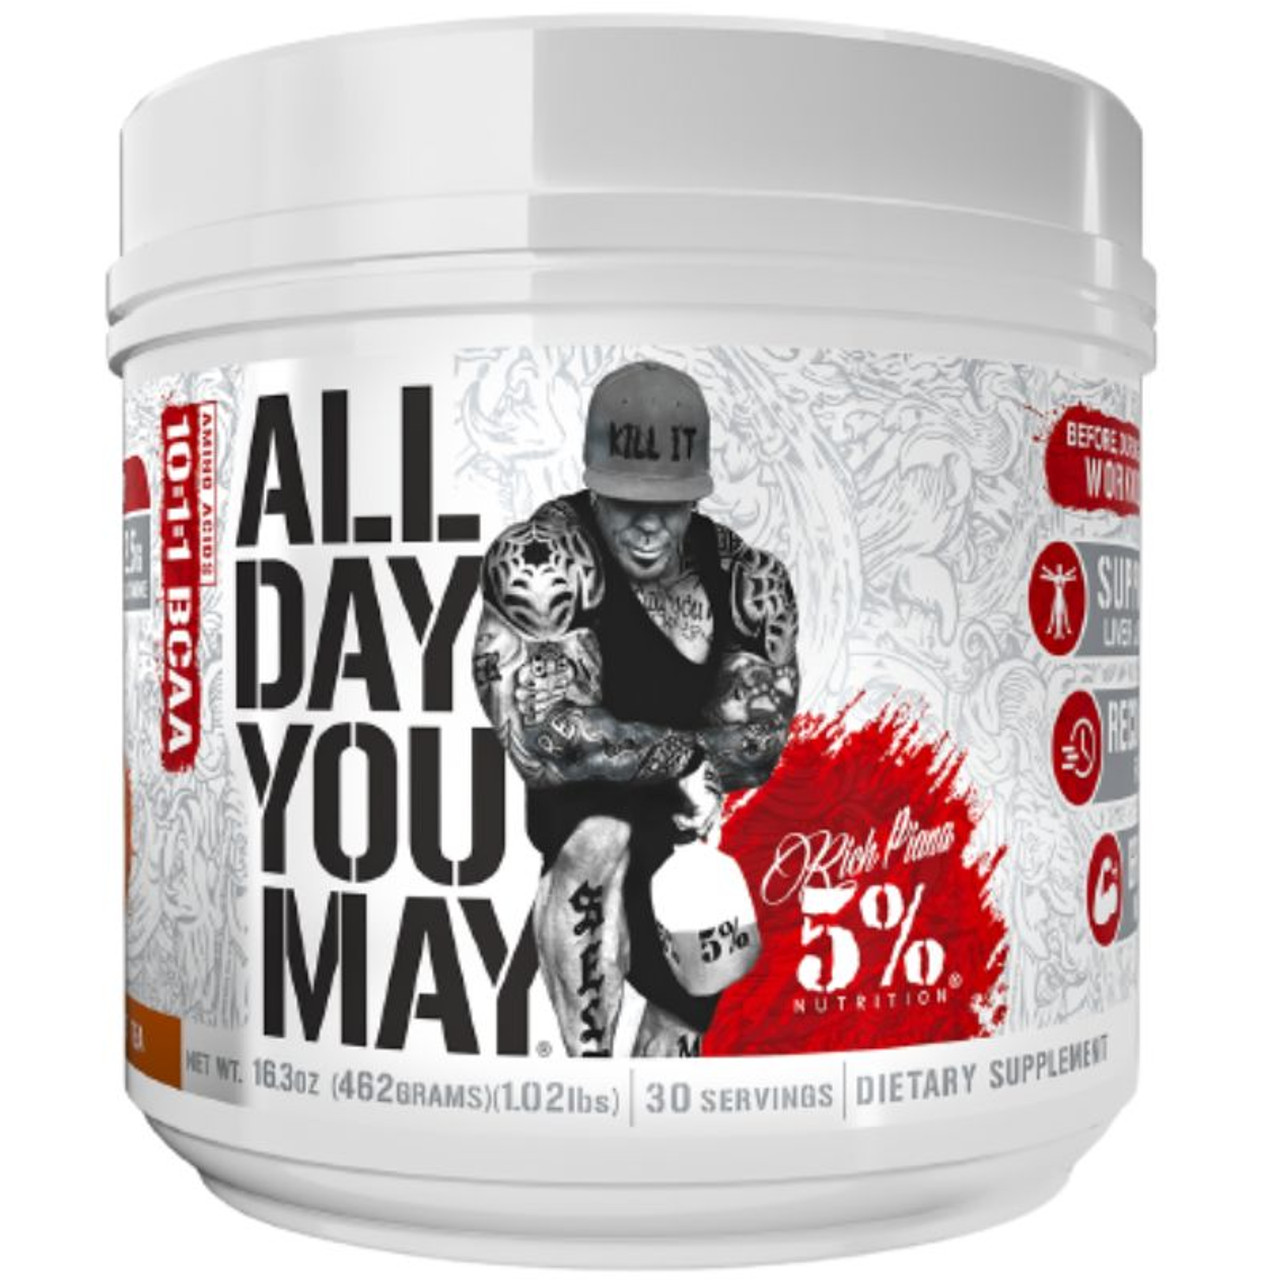 5% Nutrition ALL DAY YOU MAY Southern Sweet Tea-462g